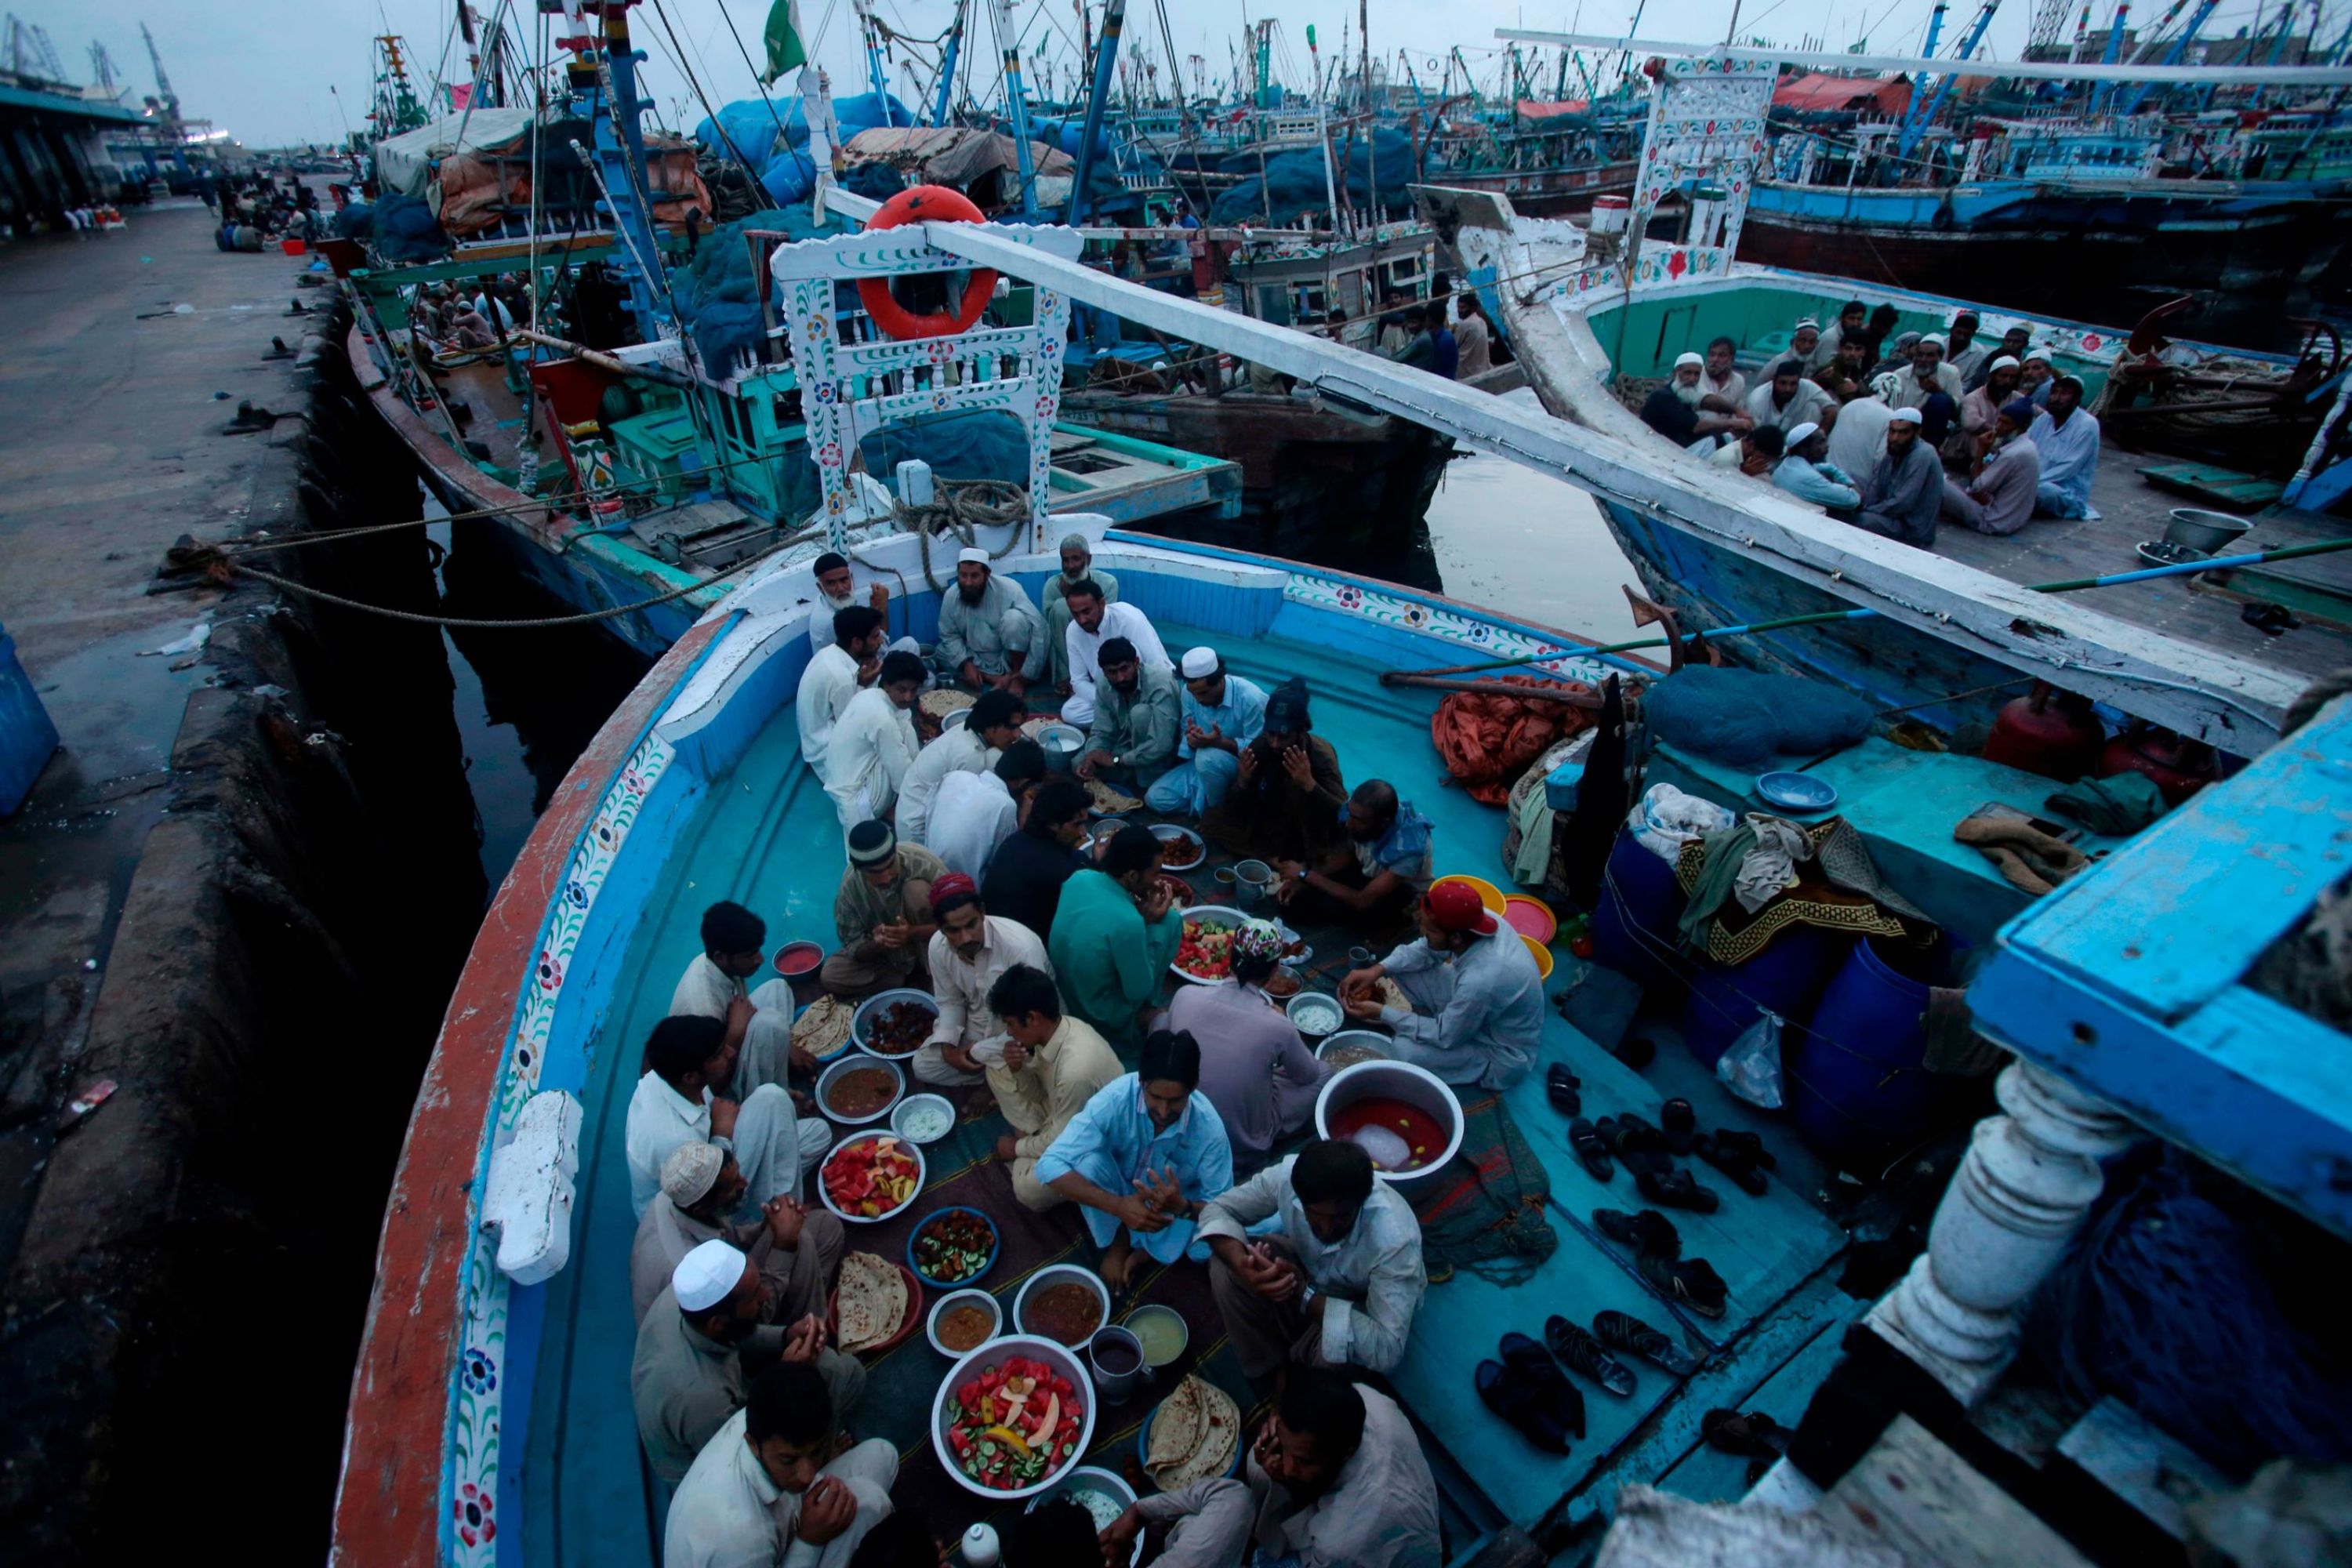 Pakistani fishermen sitting in their boats, pray before breaking their fast in Karachi on Thursday.